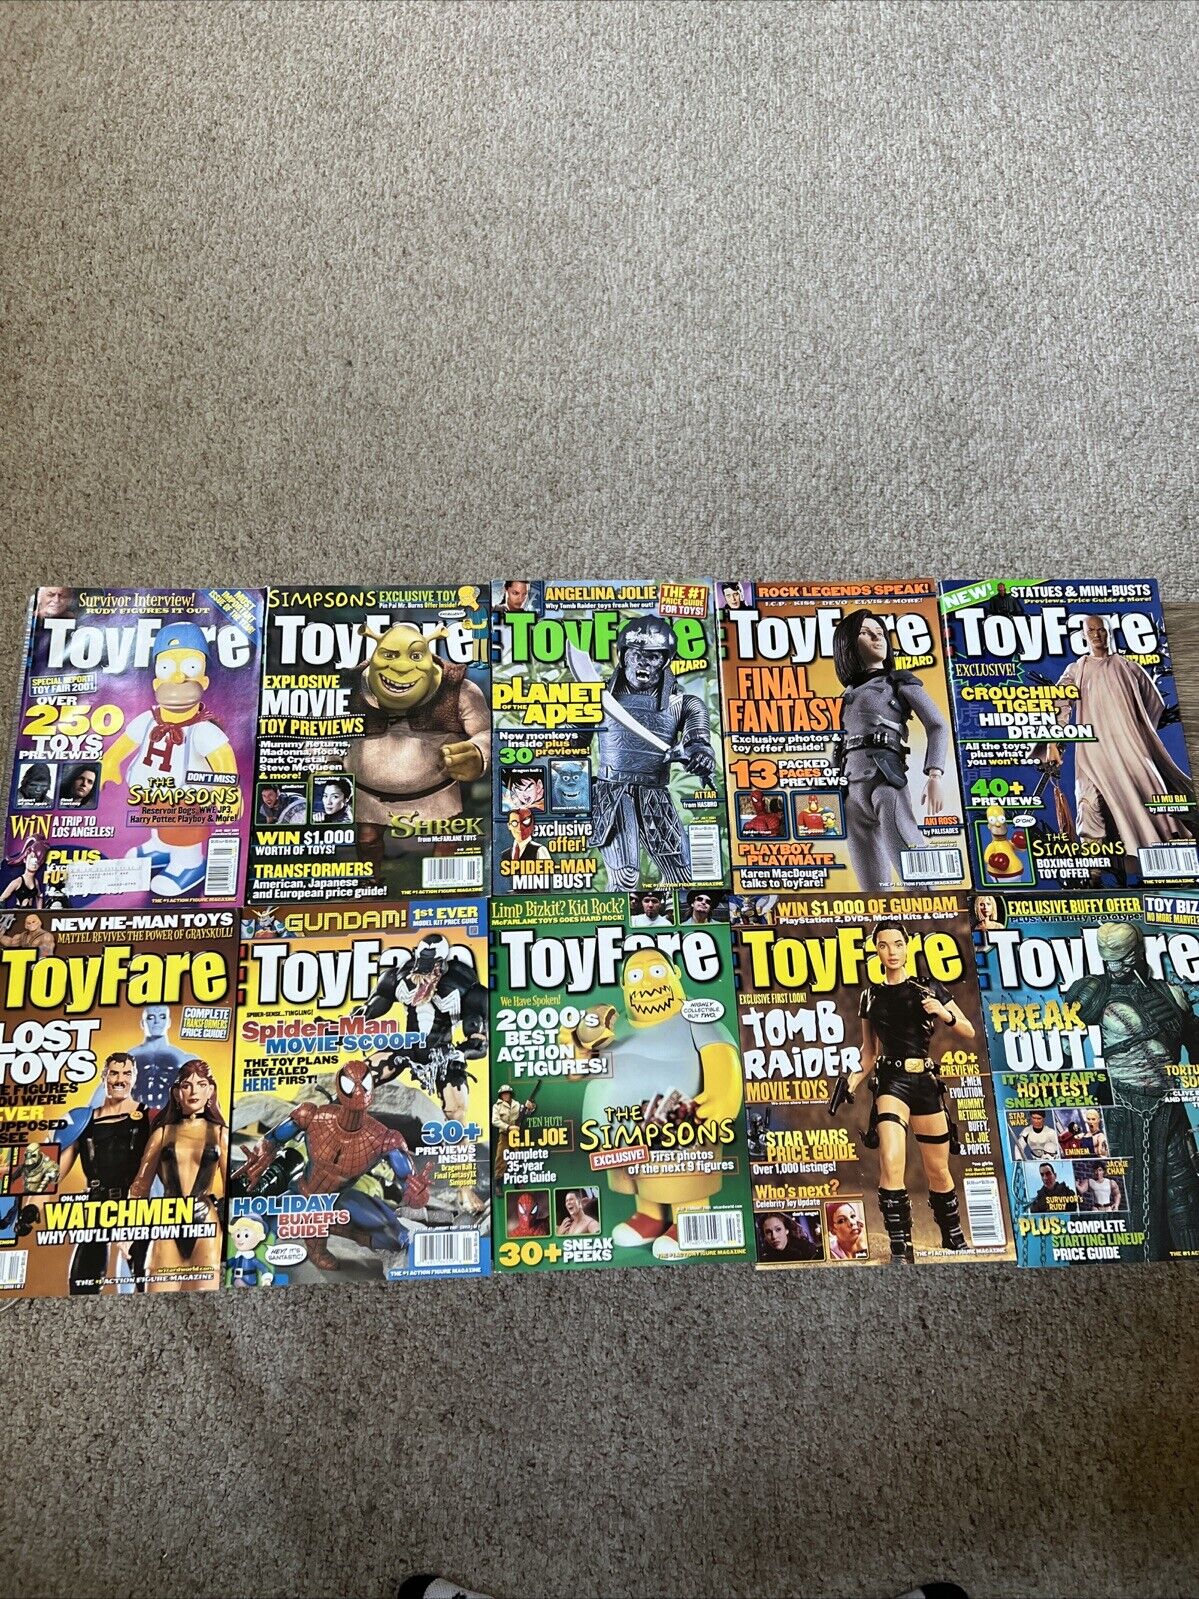 ToyFare Magazine 2001 Lot Of 10 - Issues 40 41 42 43 44 35 46 47 48 49 Simpsons